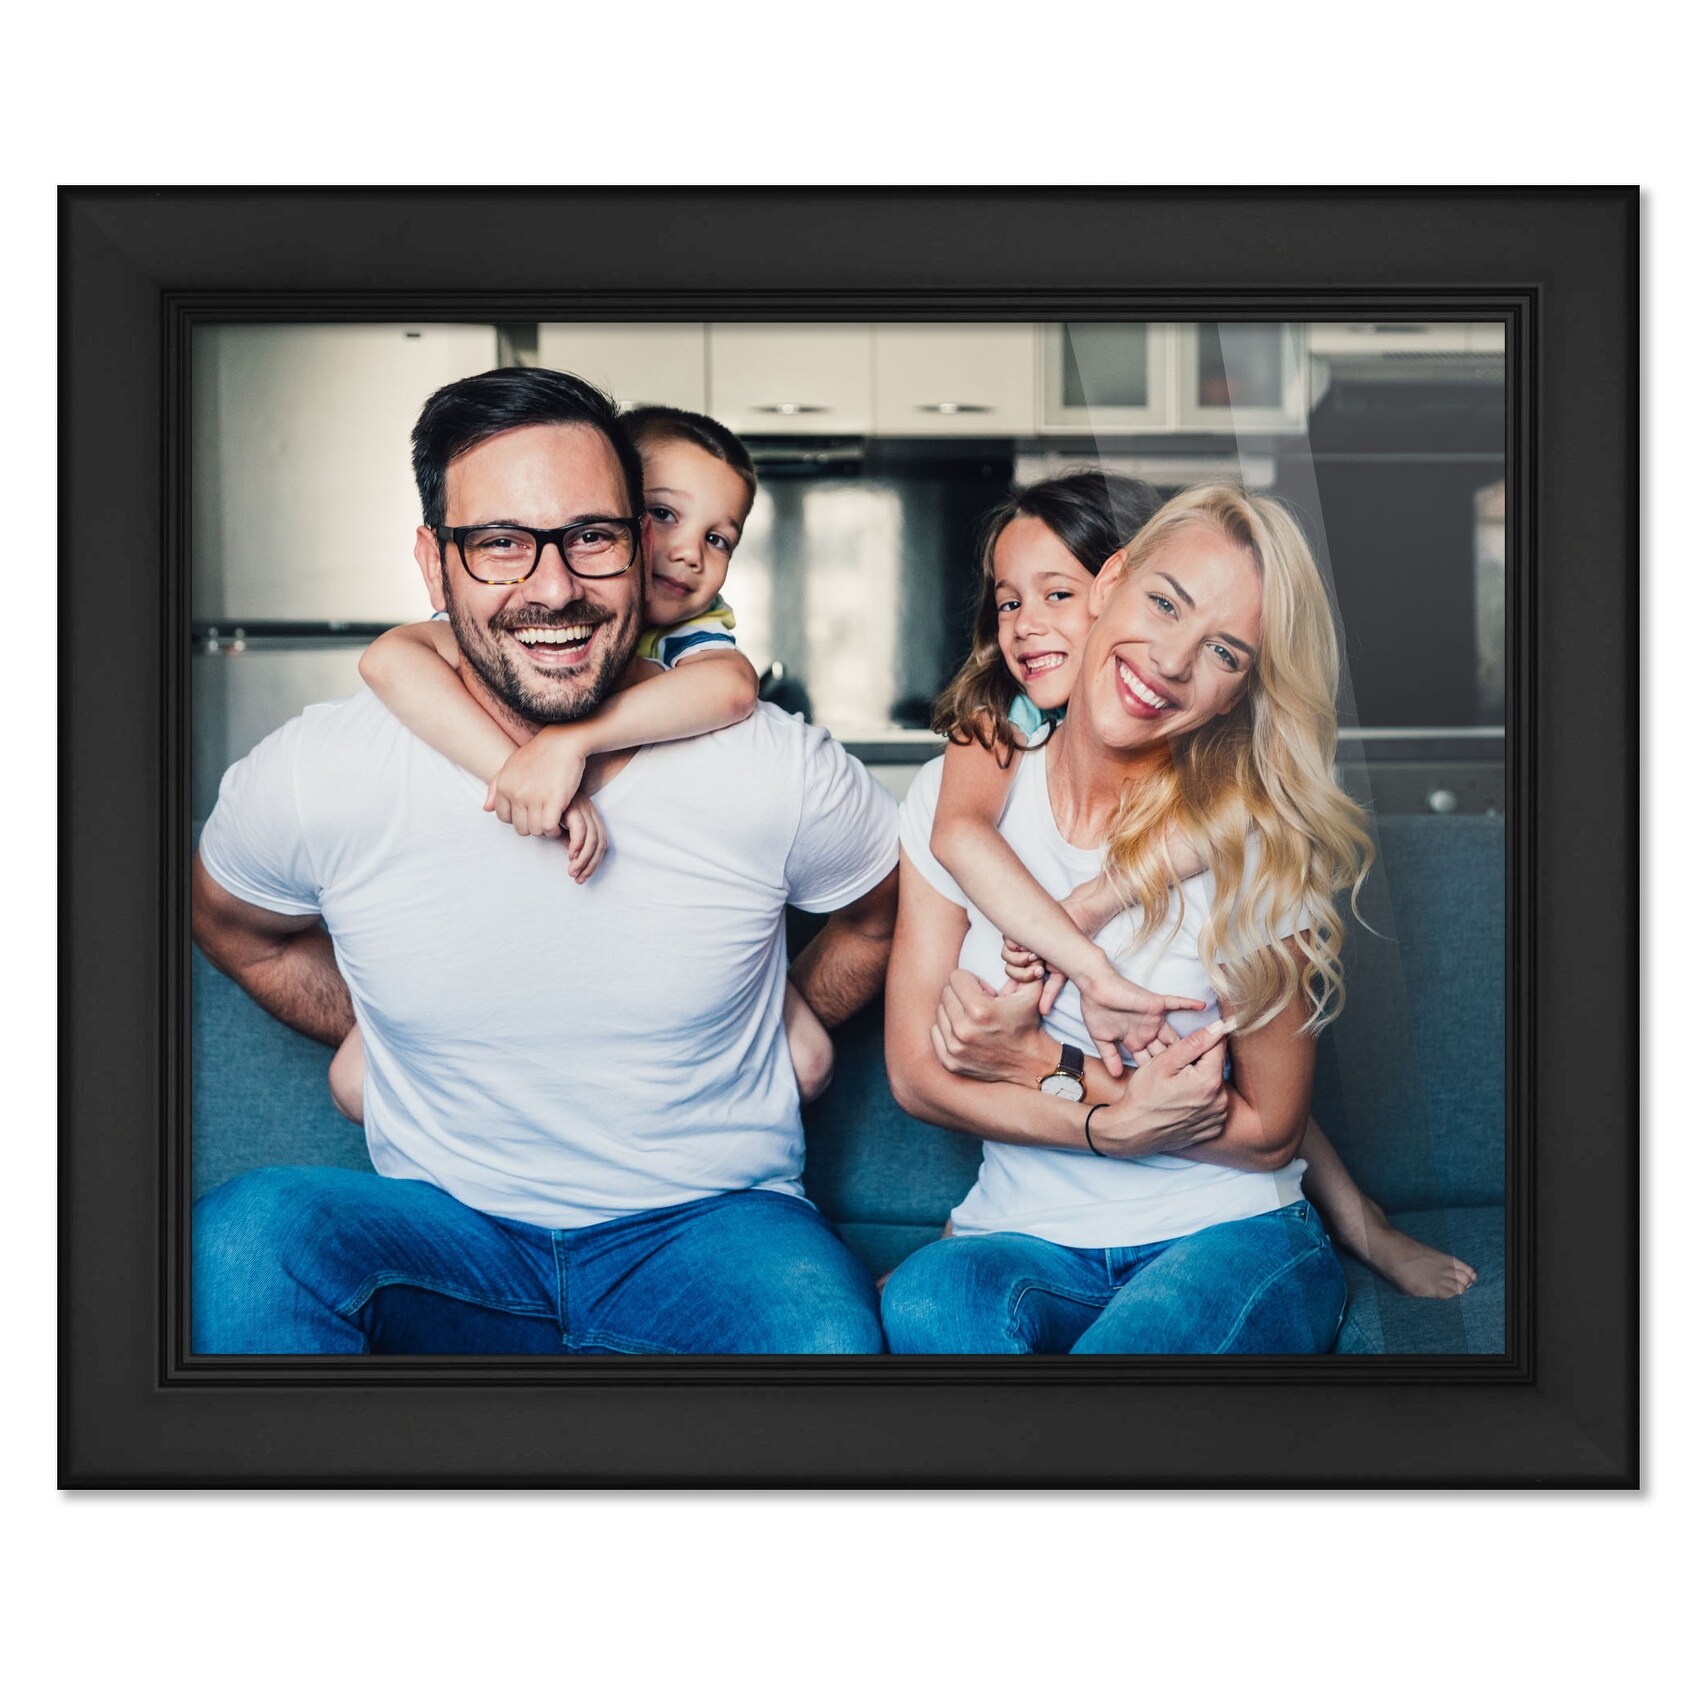 https://ak1.ostkcdn.com/images/products/is/images/direct/345bfb9e2815437fc4cf79505681d67536ff9de1/6x10-Frame-Black-Picture-Frame---Complete-Modern-Photo-Frame-Includes.jpg